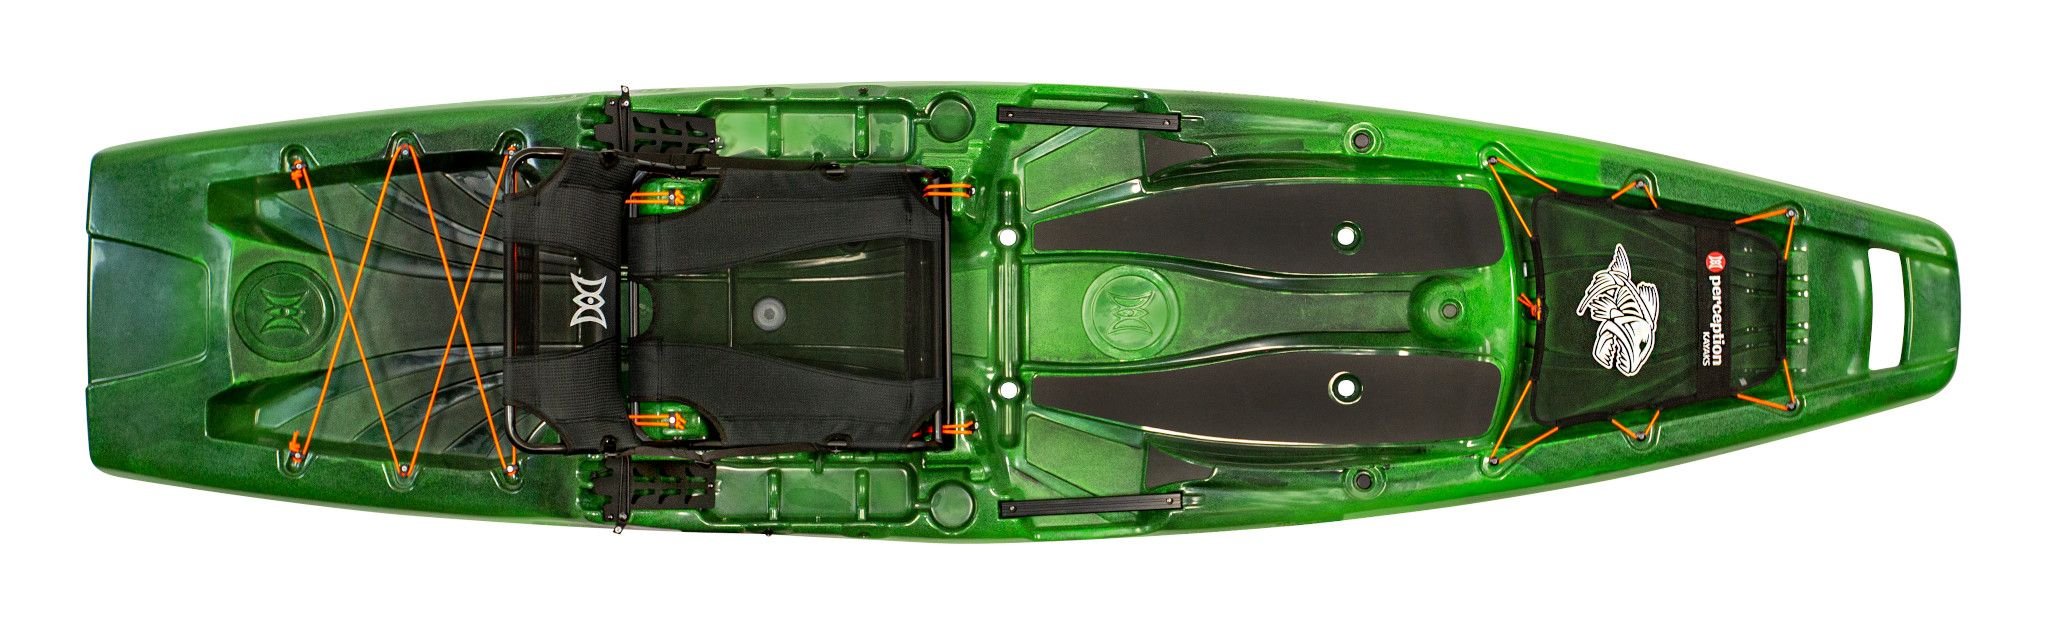 Perception Outlaw Sit on top fishing kayak highest capacity — TRUSTY